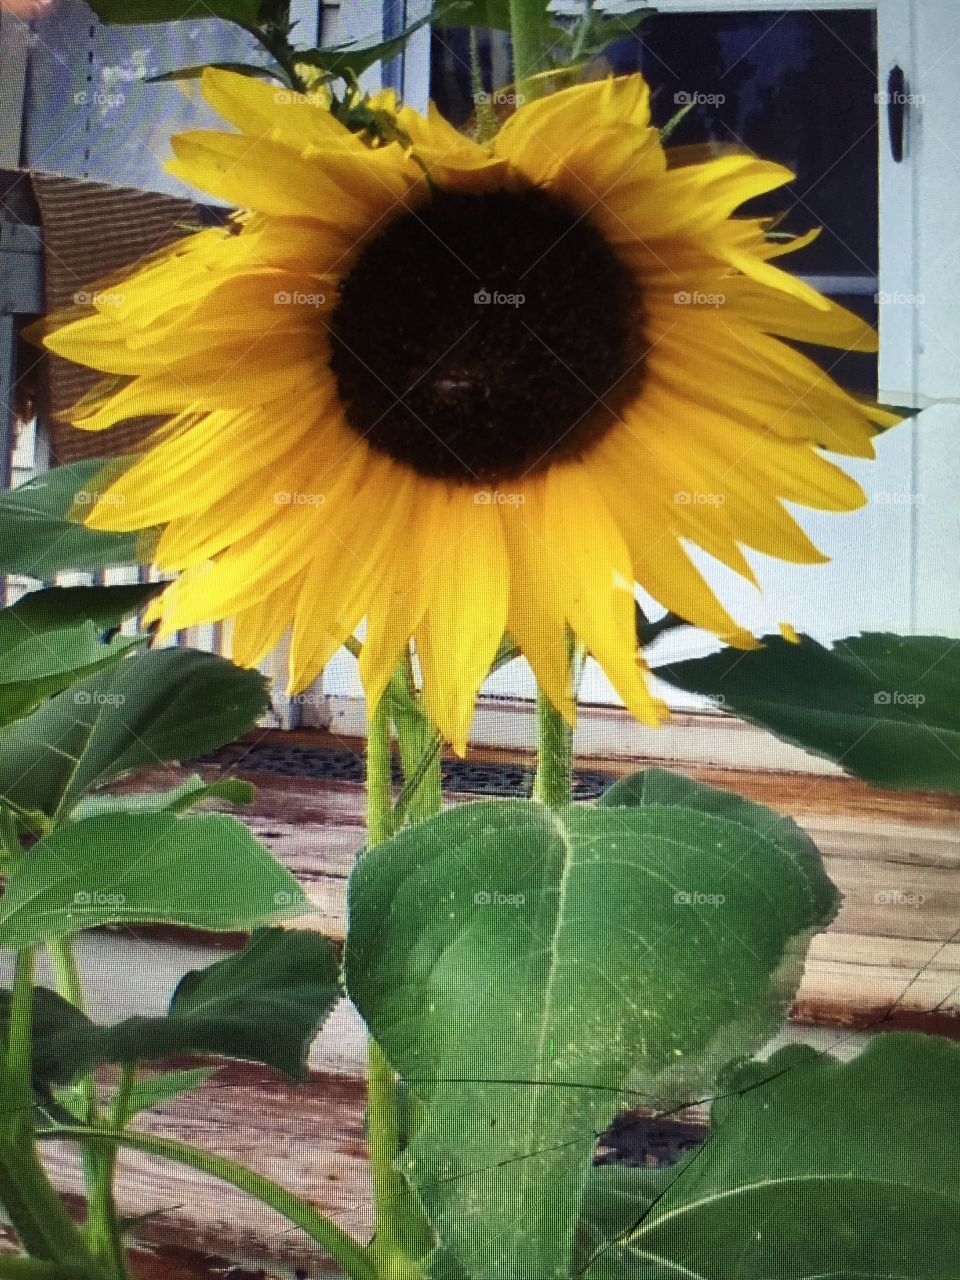 Sunflower in my sisters garden in her front yard in country.